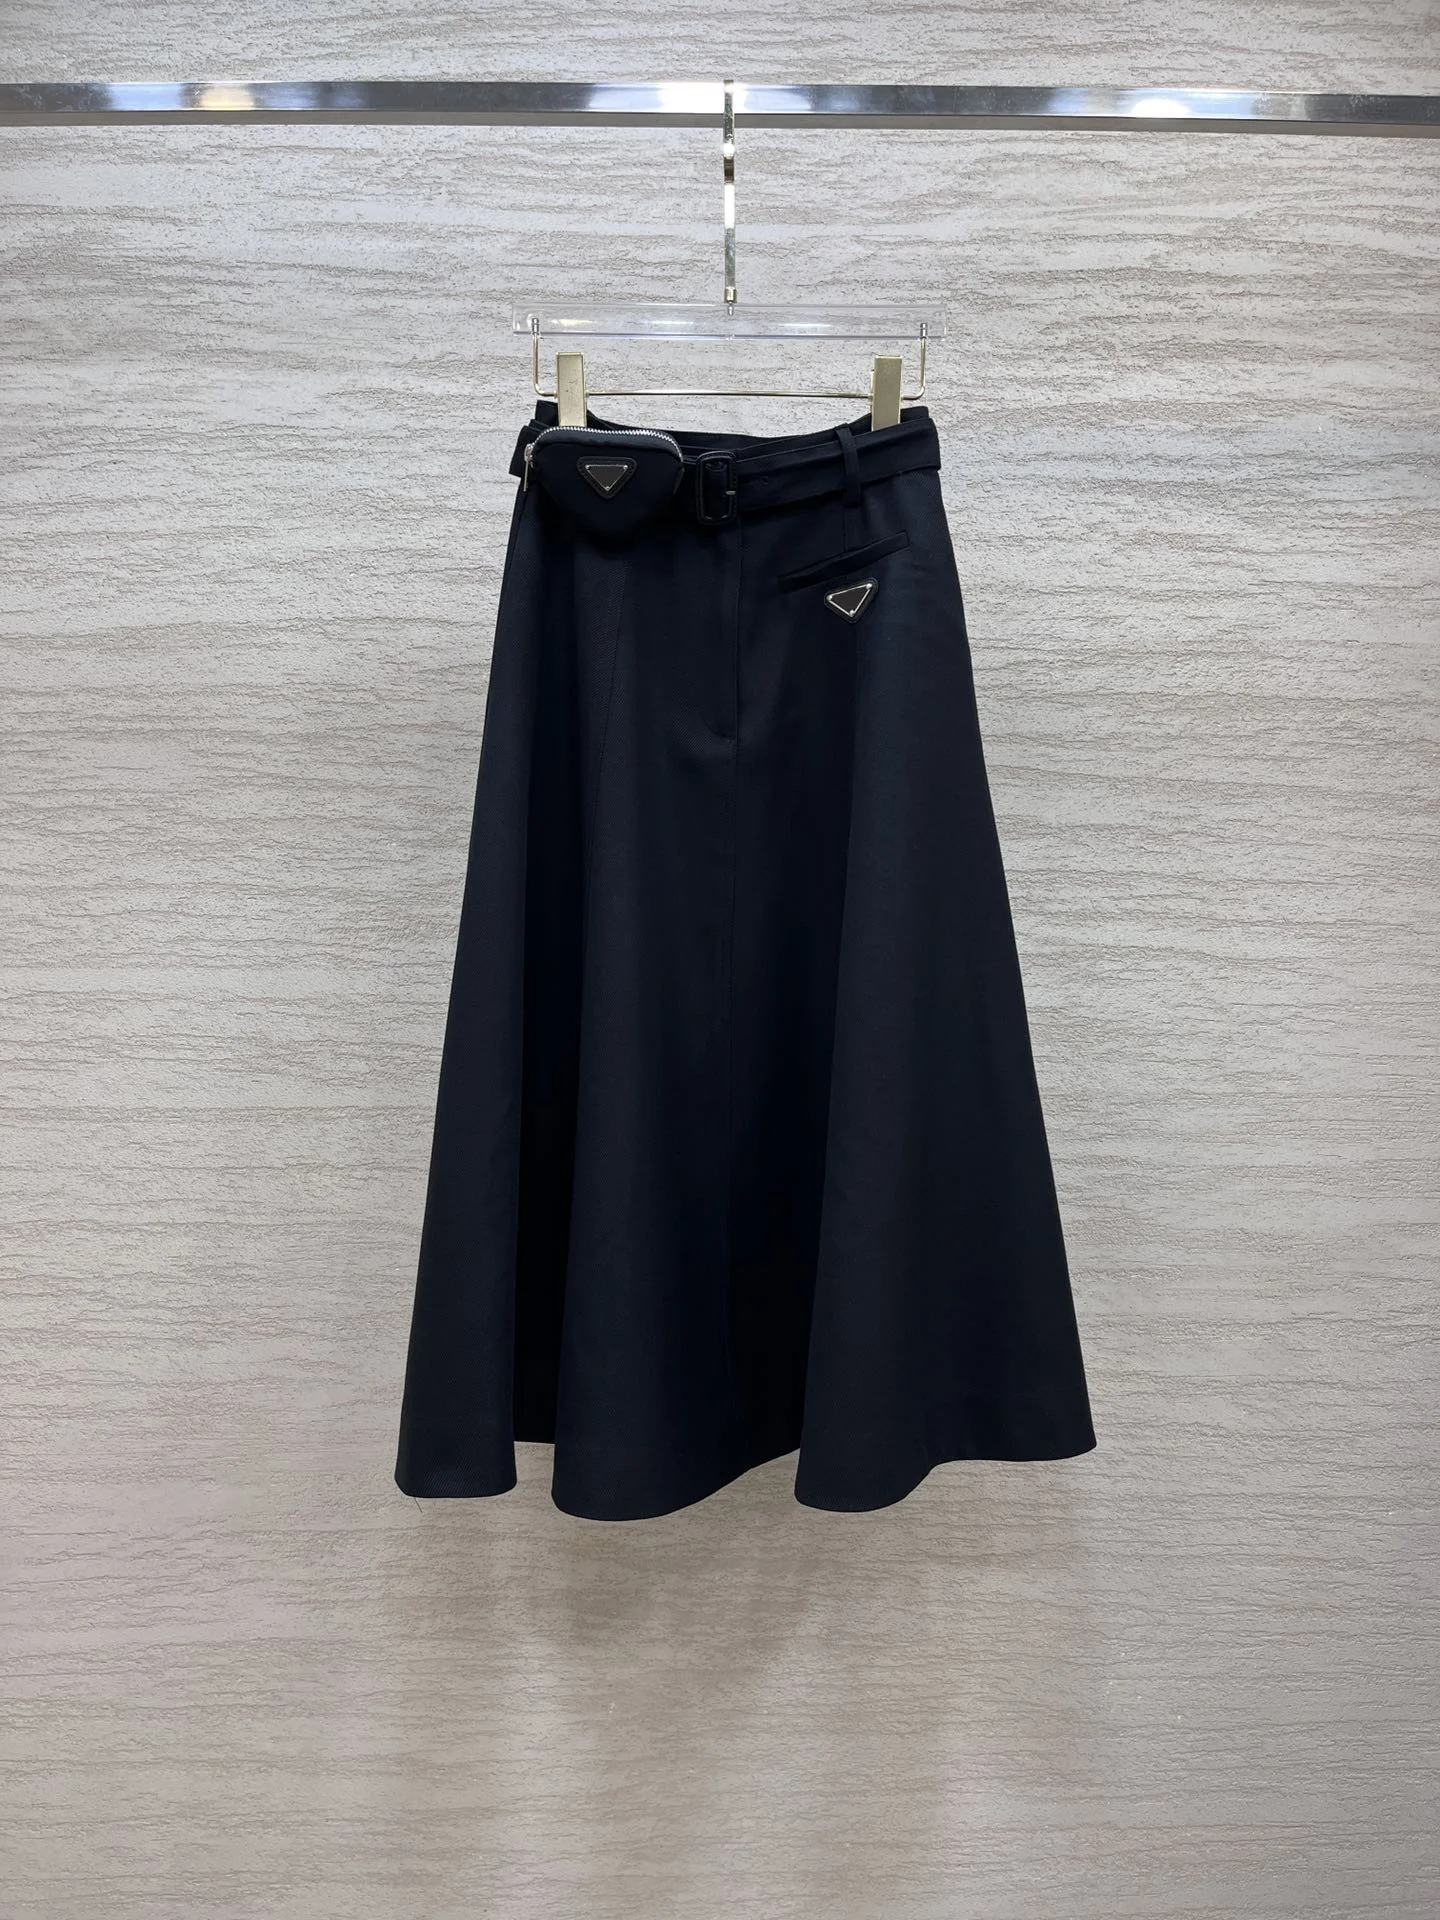 

2023 Early autumn new style, large skirt half skirt, with Fanny pack style, custom imported thick oblique fabric, high and thin